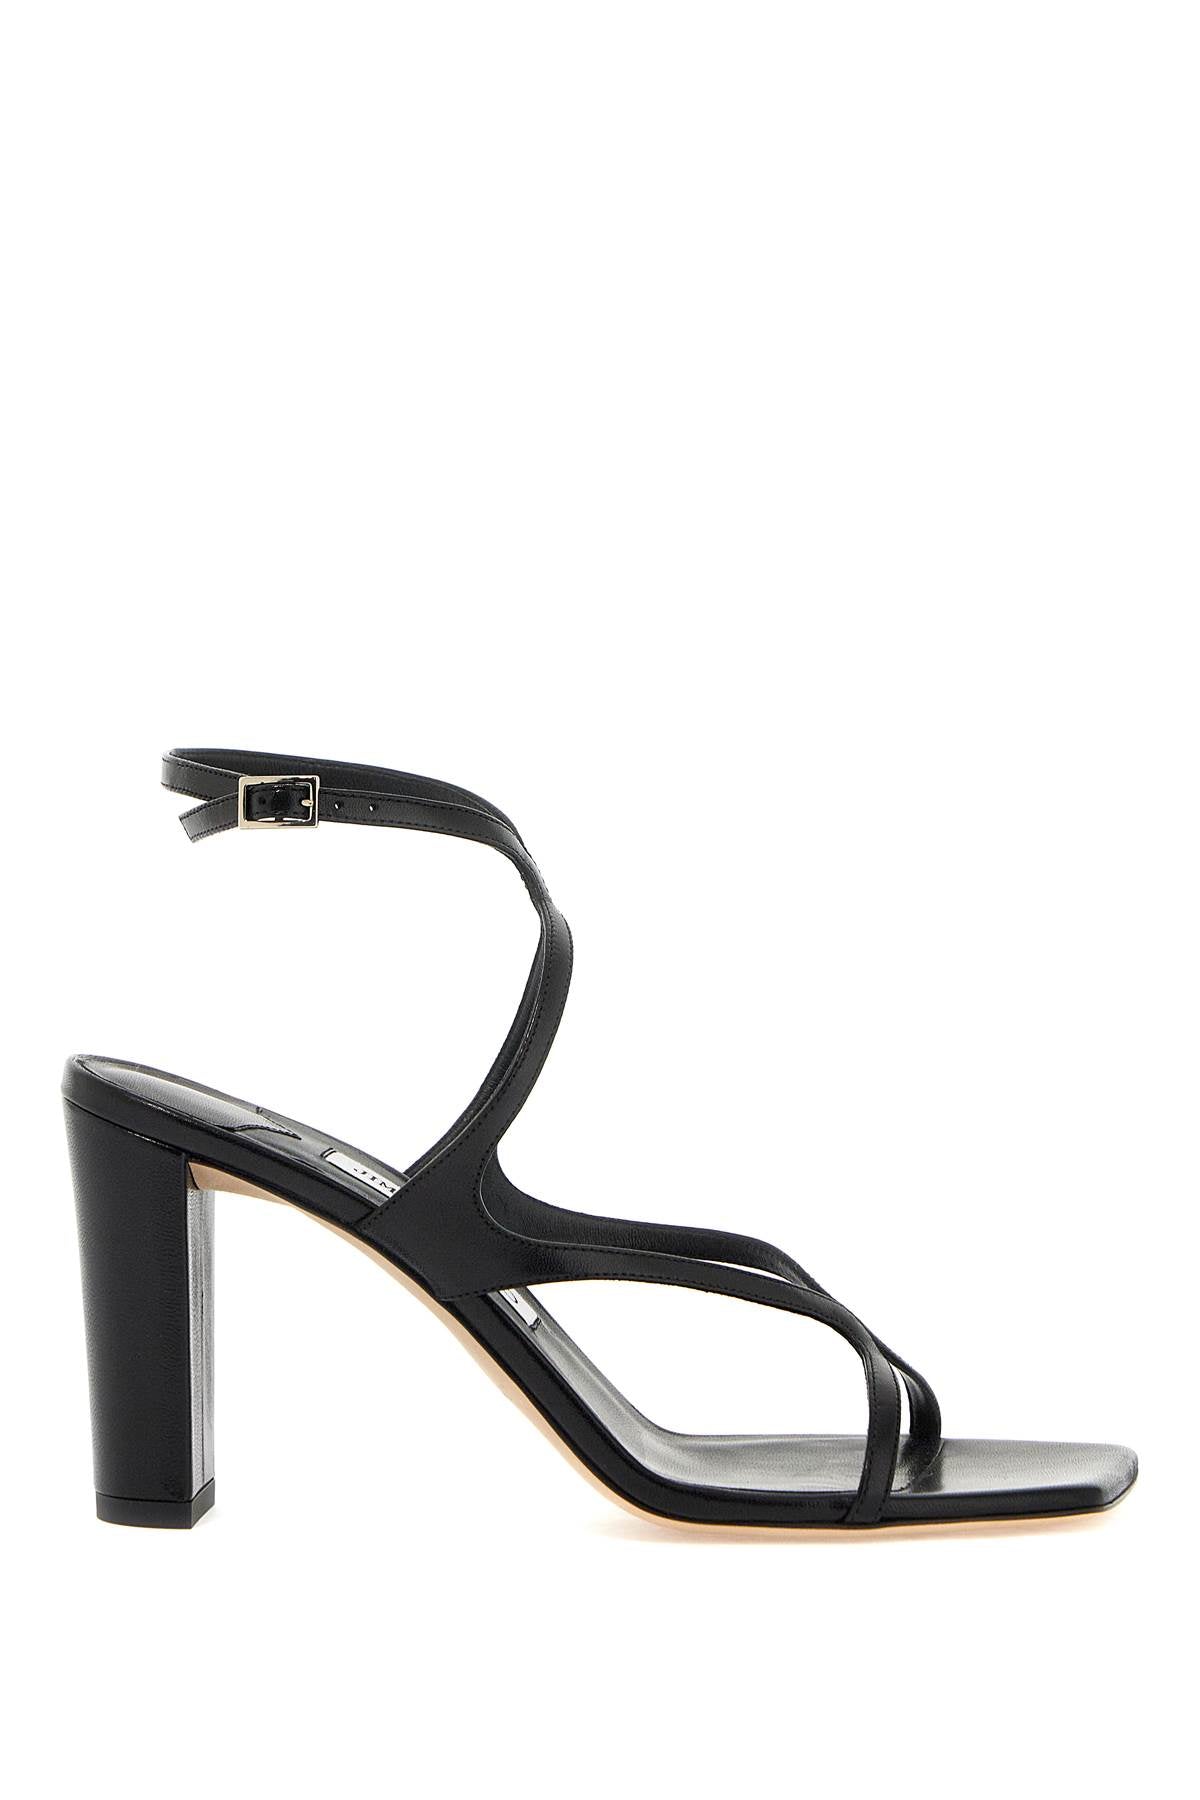 JIMMY CHOO Sophisticated Step: Black Nappa Leather Sandals for Women